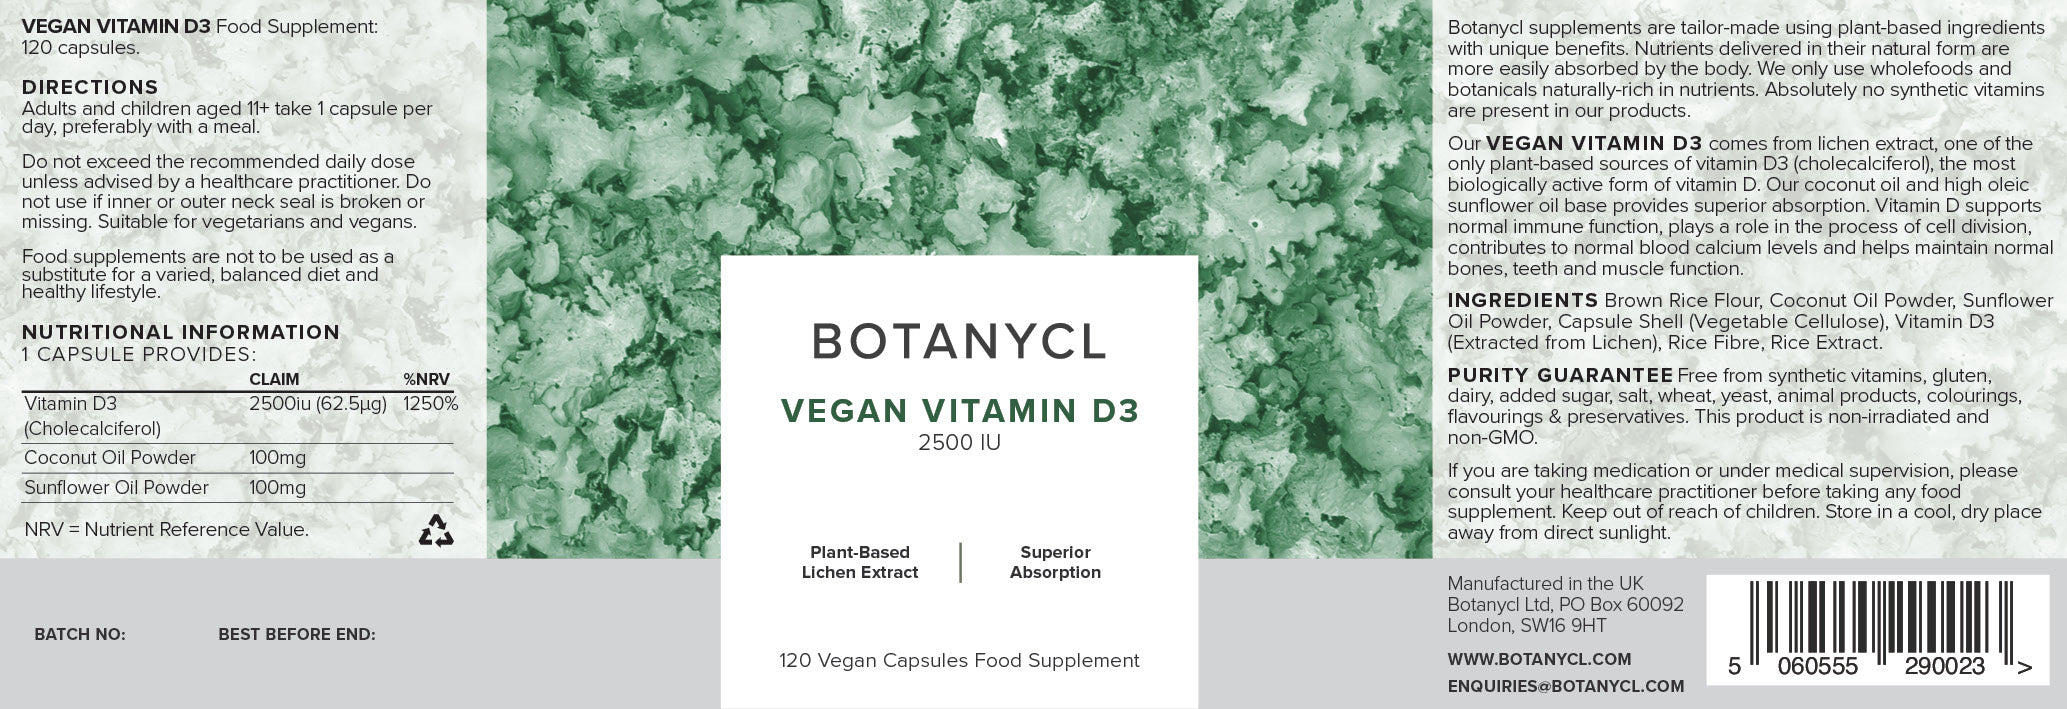 Botanycl Vegan Vitamin D3 lichen based cholecalciferol. The only plant-based sources of vitamin D. Our vitamin D in the most bioavailable & bioactive form and contains added botanicals and coconut oil for superior absorption. Vitamin D is essential to support a healthy immune system.